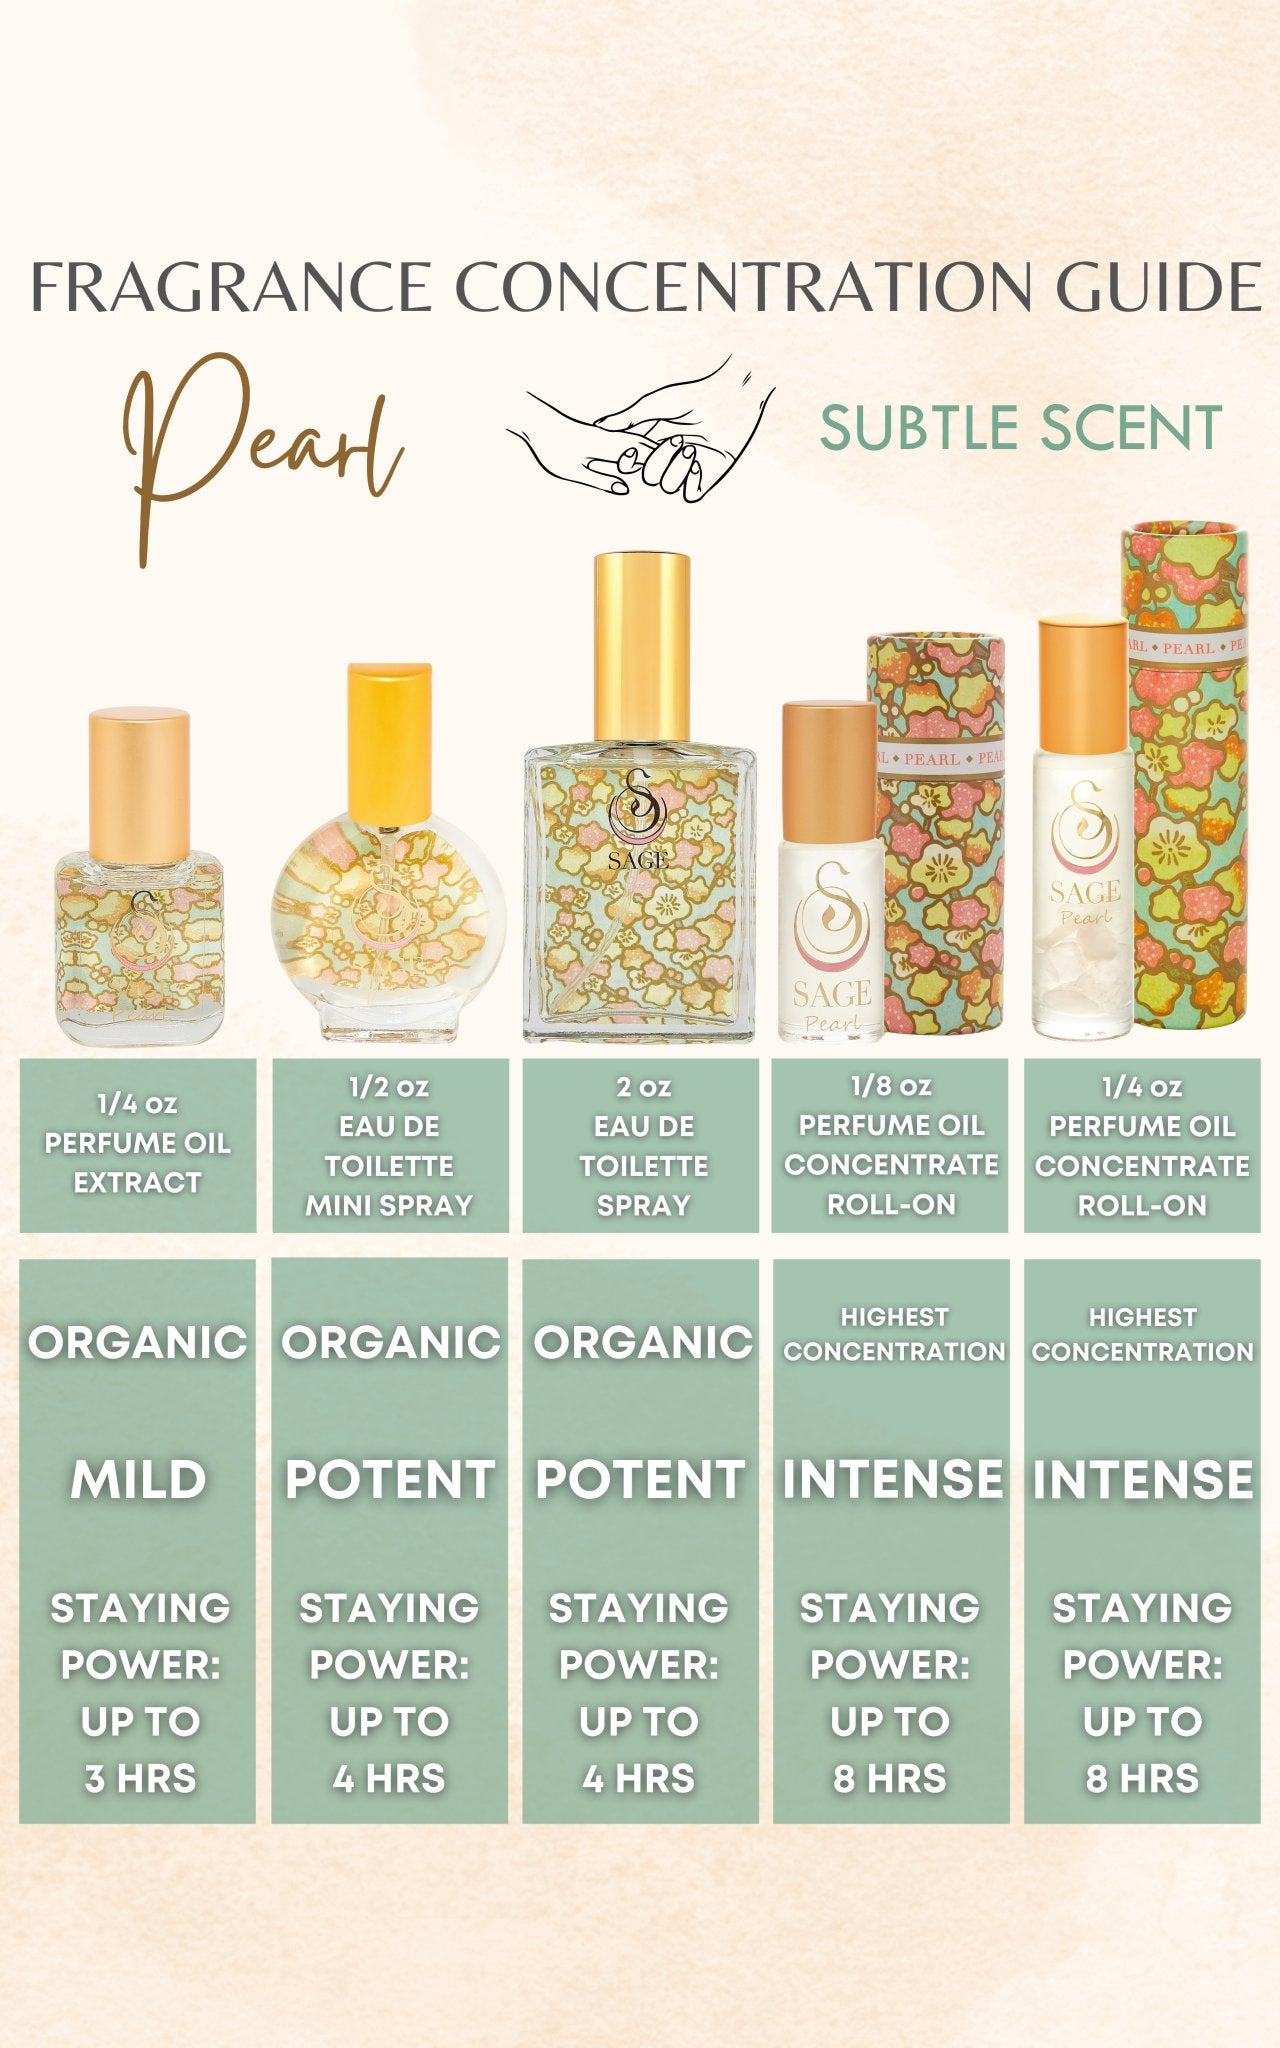 Pearl 1/8 oz Perfume Oil Concentrate Roll-On by Sage - The Sage Lifestyle